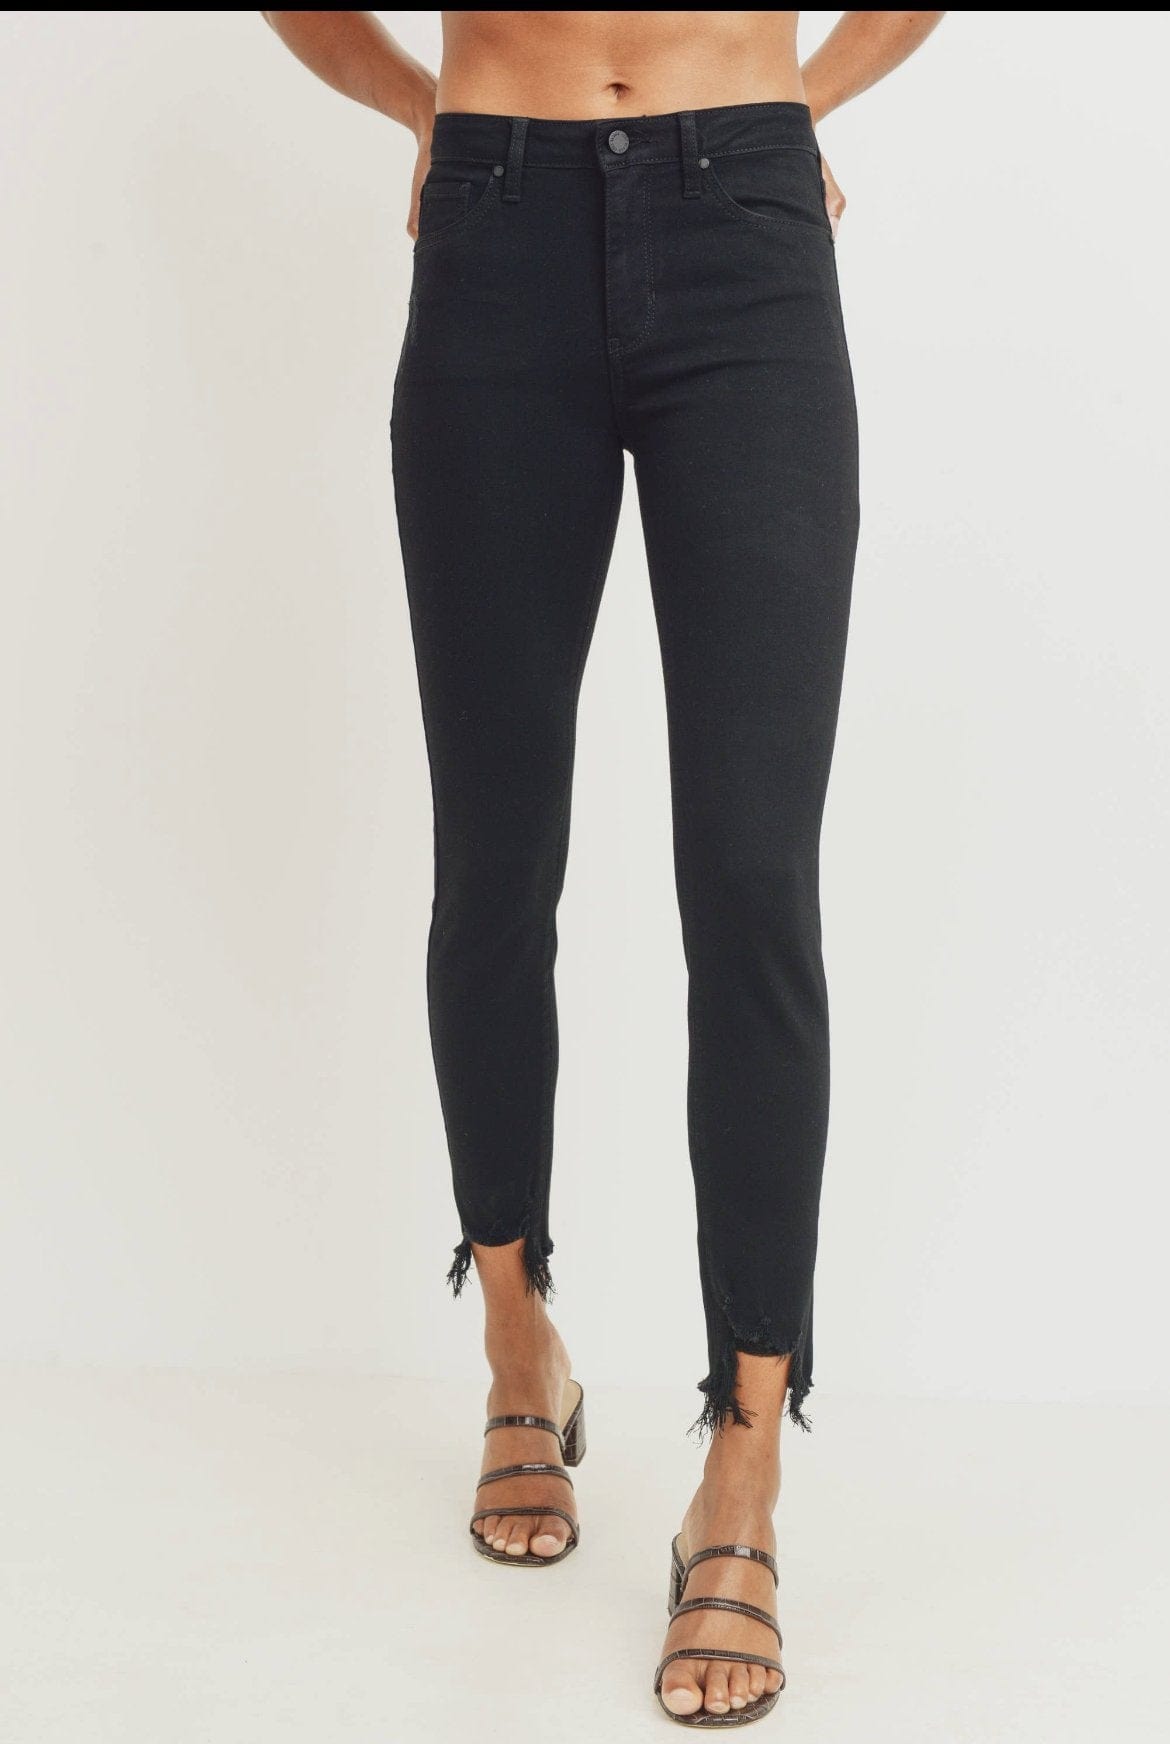 Where to buy just black jeans, just black denim, Where to buy just black jeans online, Where to buy just black jeans locally, Just black denim Brand, Just Black jeans Stitch Fix, Just black jeans Amazon,  Just black denim Brand, Fort Smith Boutique, Fayetteville AR boutique, the cloth, cozy casual, comfy casual